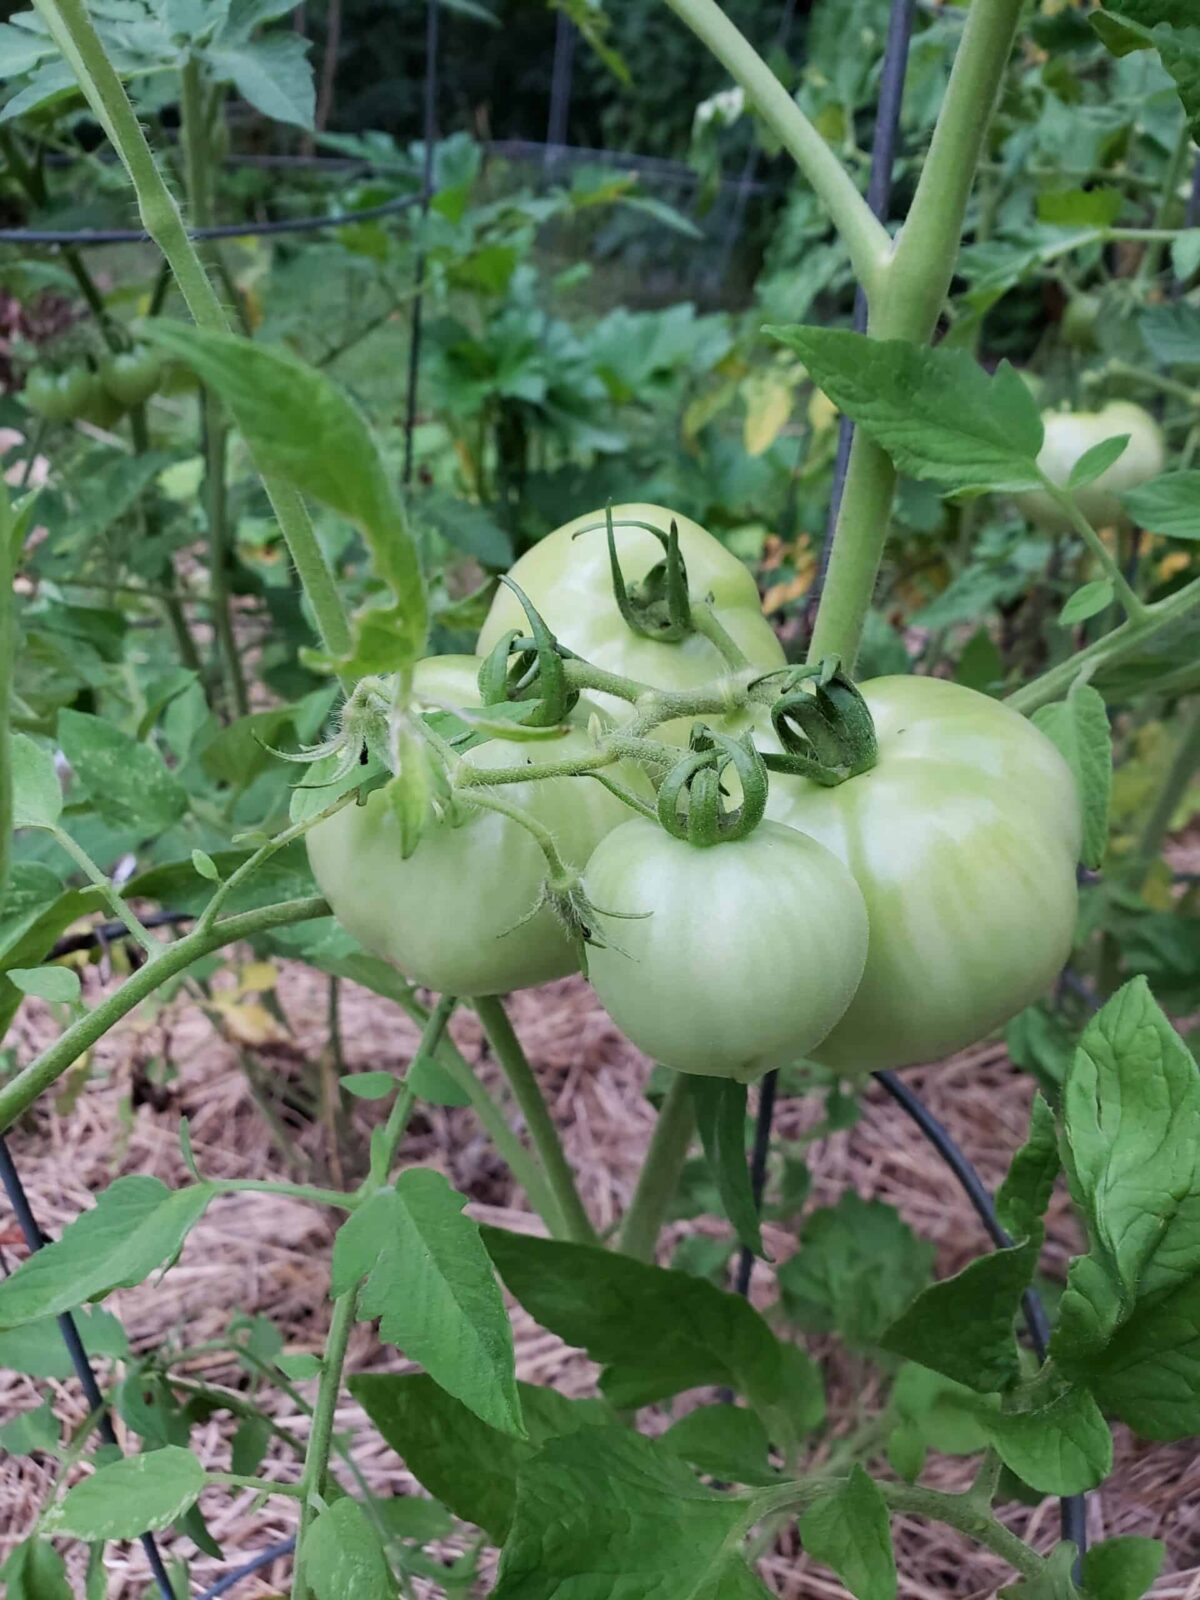 four green tomatoes on the vine in a garden